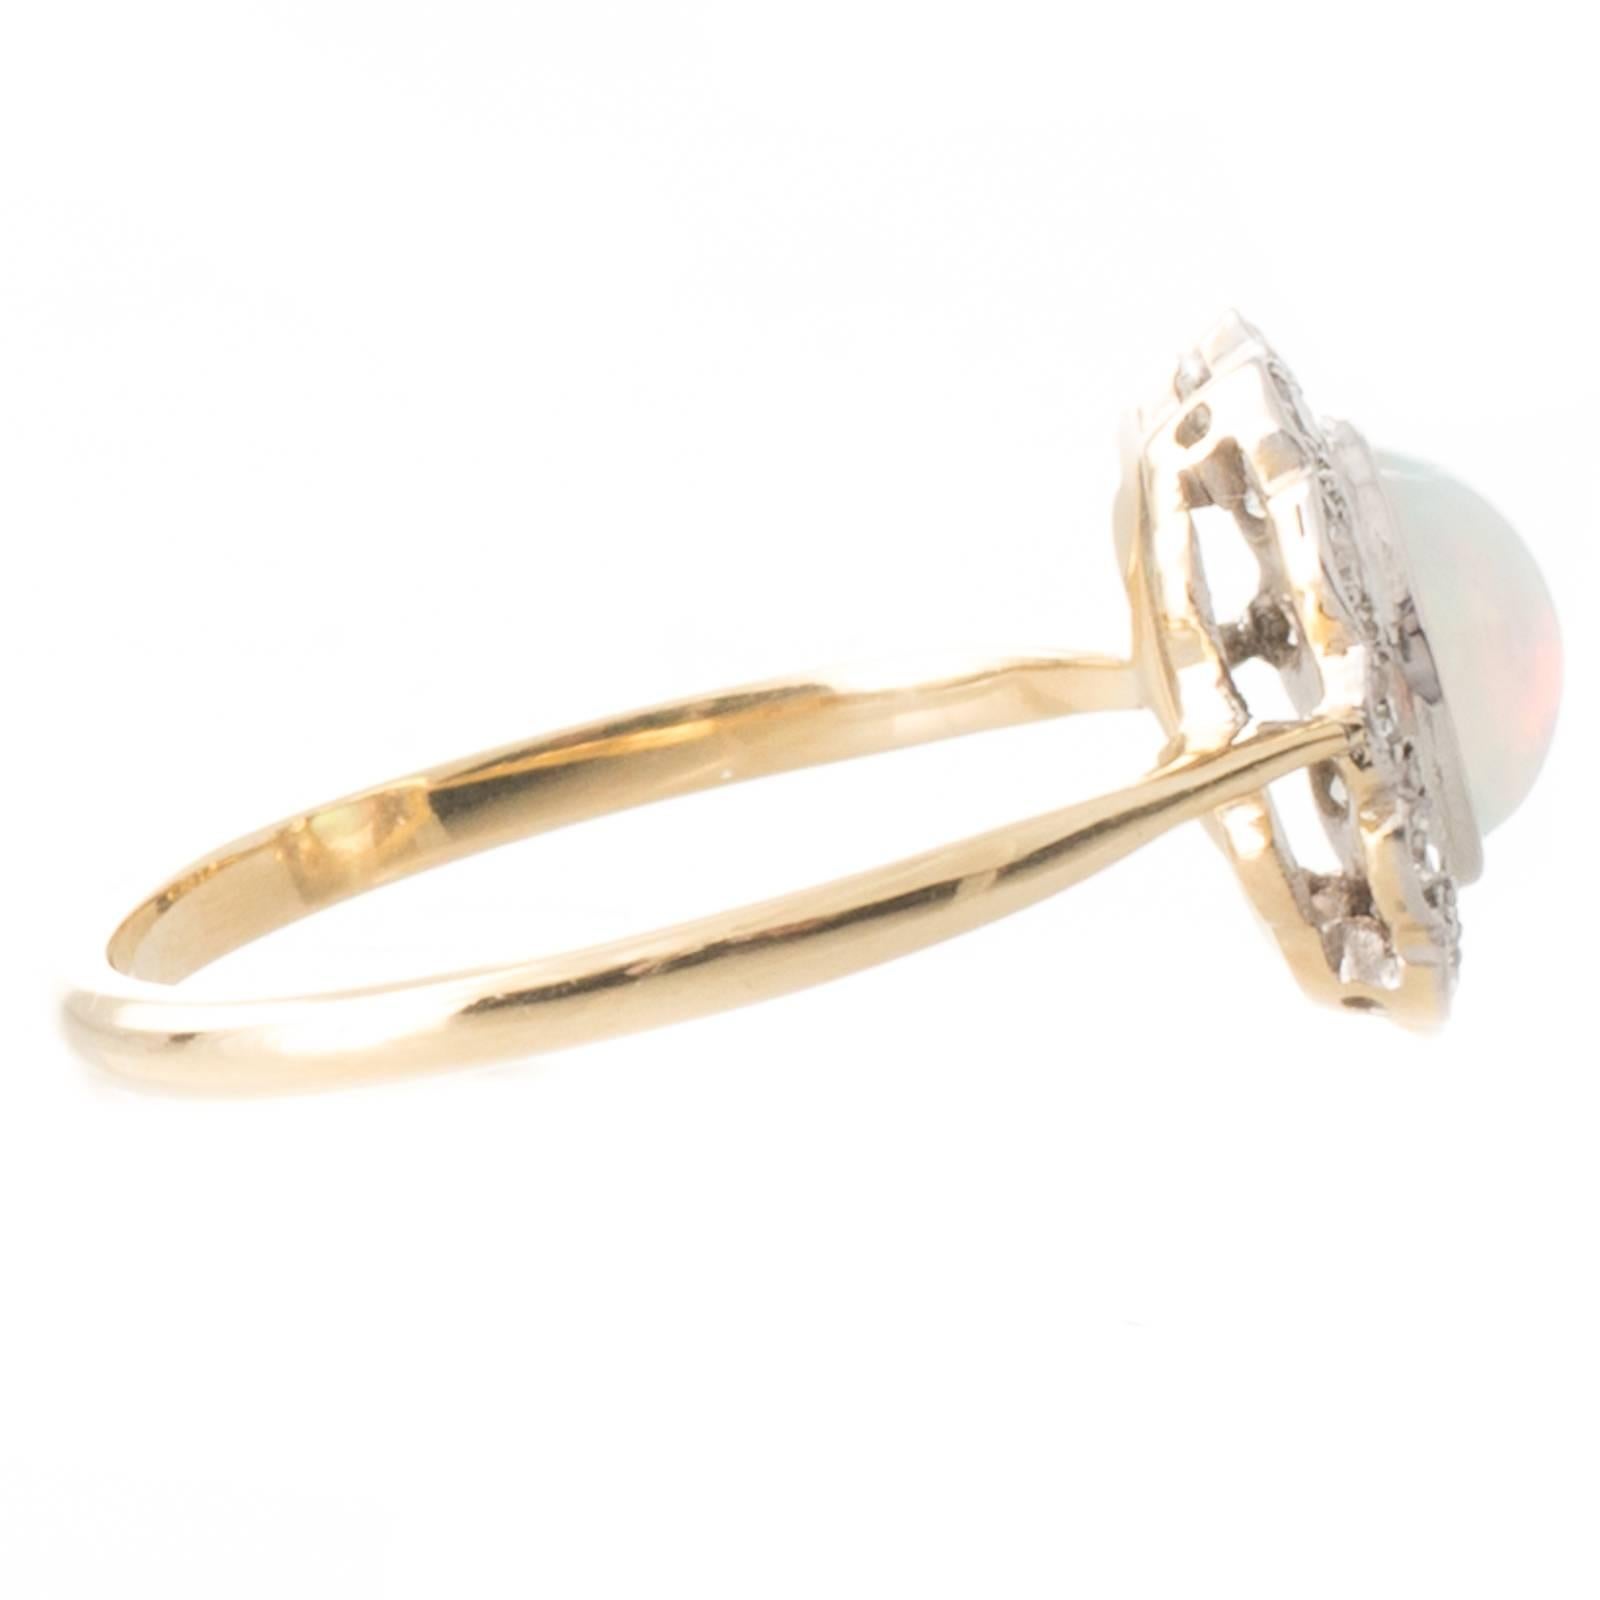 An 18ct yellow gold and platinum antique ring set with seven old cut diamonds in millegrain edging above a scalloped layered gallery to upswept spear point shoulders and a plain polished band. 
Total Estimated Diamond Weight: 0.75ct Colour H-I